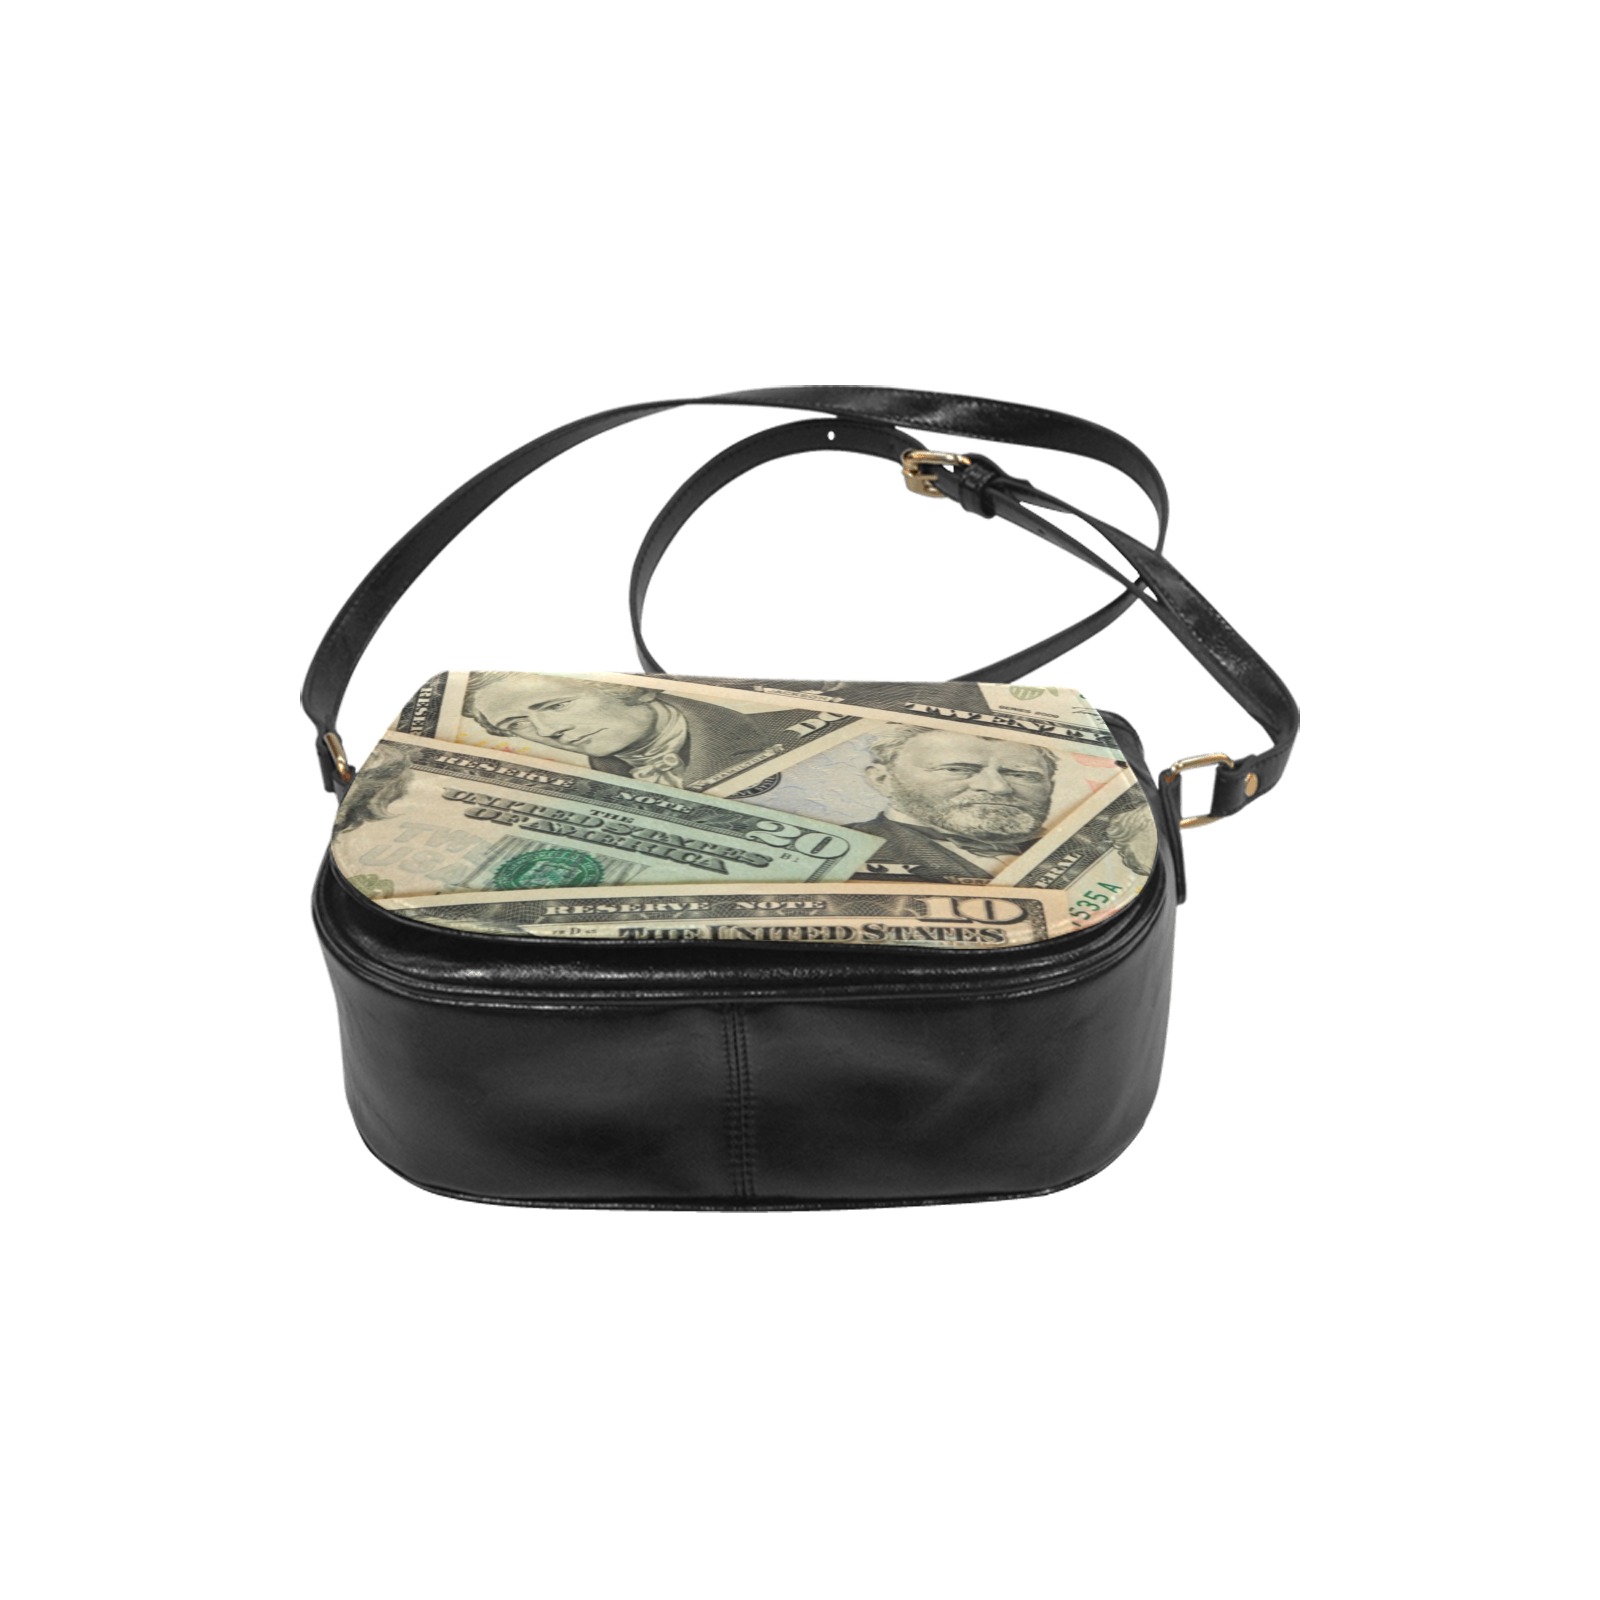 US PAPER CURRENCY Classic Saddle Bag/Small (Model 1648)